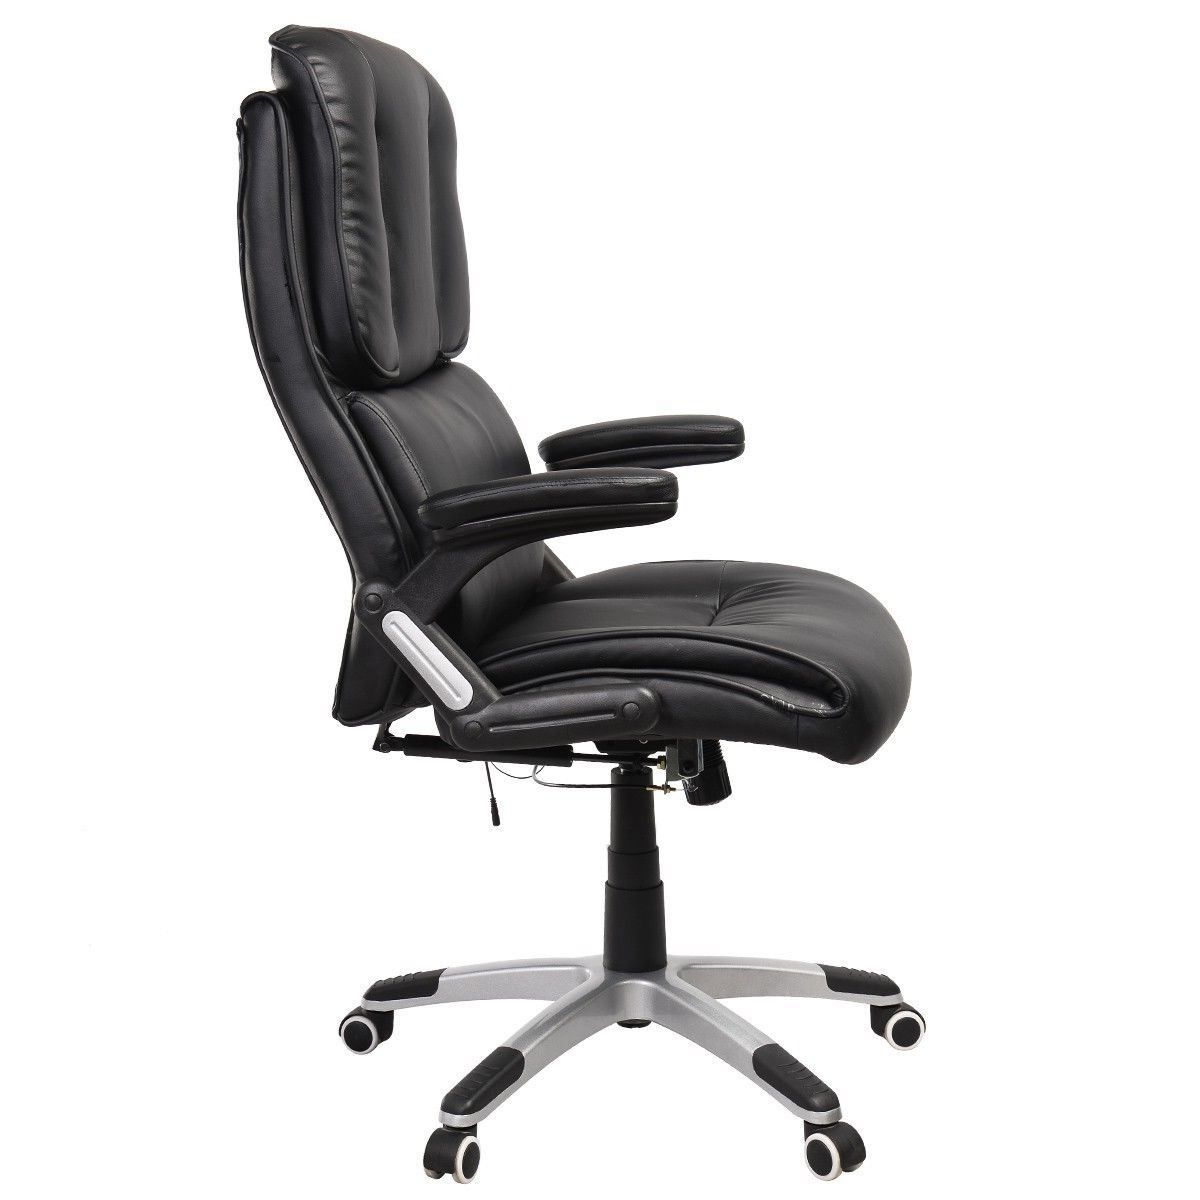 Executive Office Chairs With Massage/heat With Widely Used Convenience Boutique (View 11 of 20)